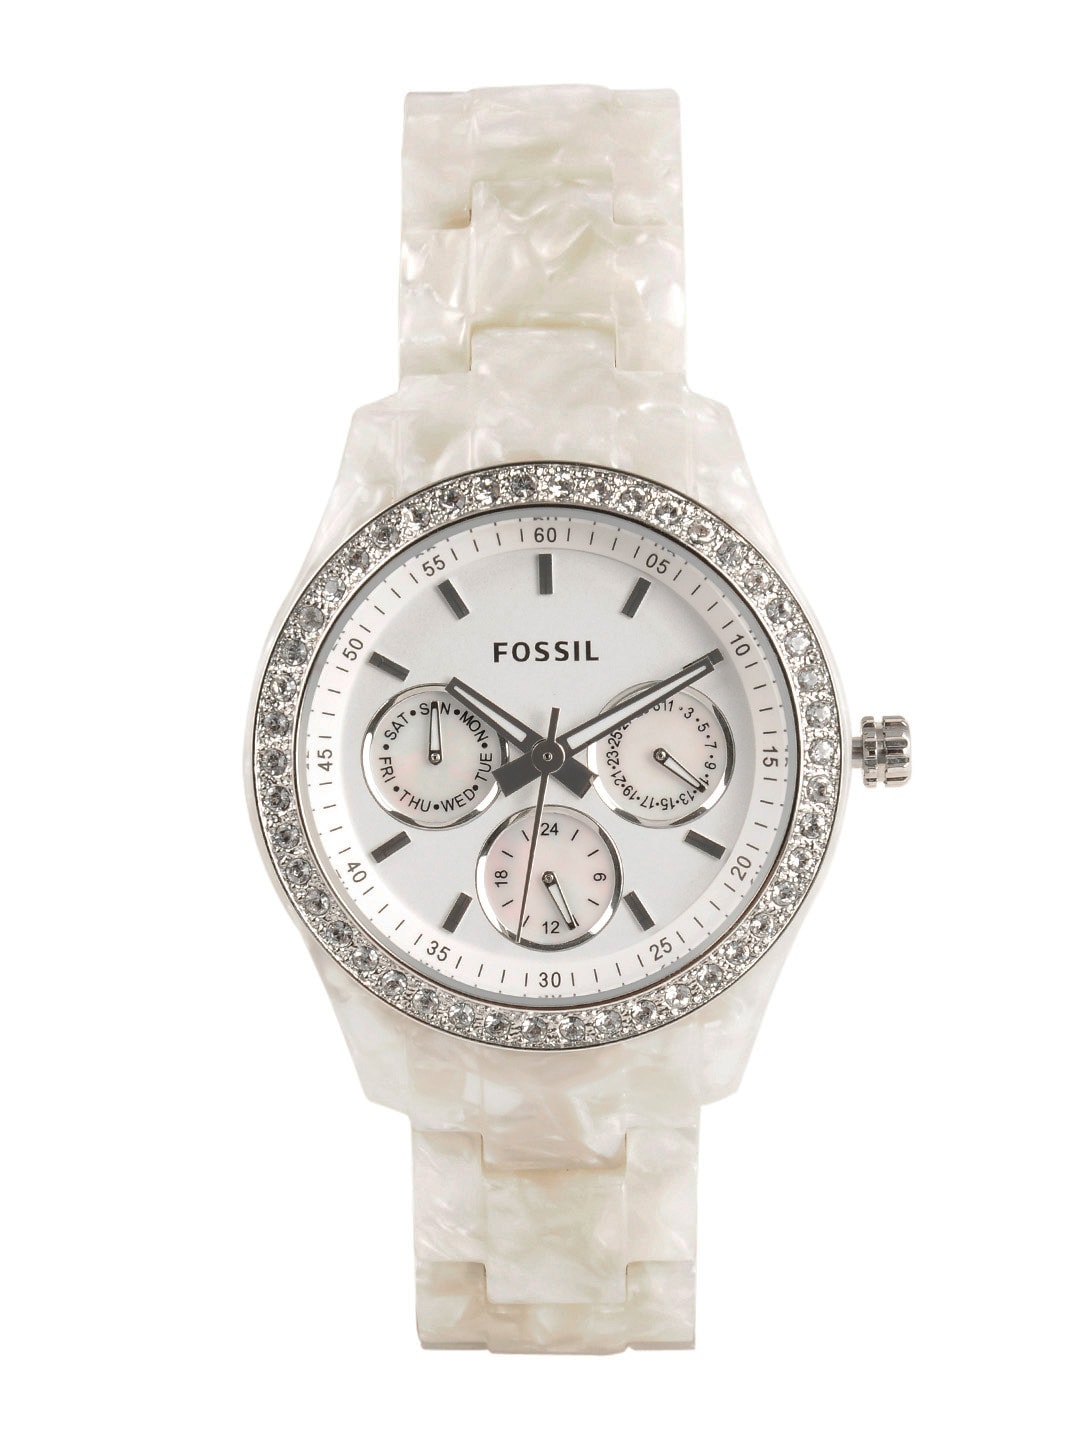 Fossil Women White Dial Chronograph Watch ES2790